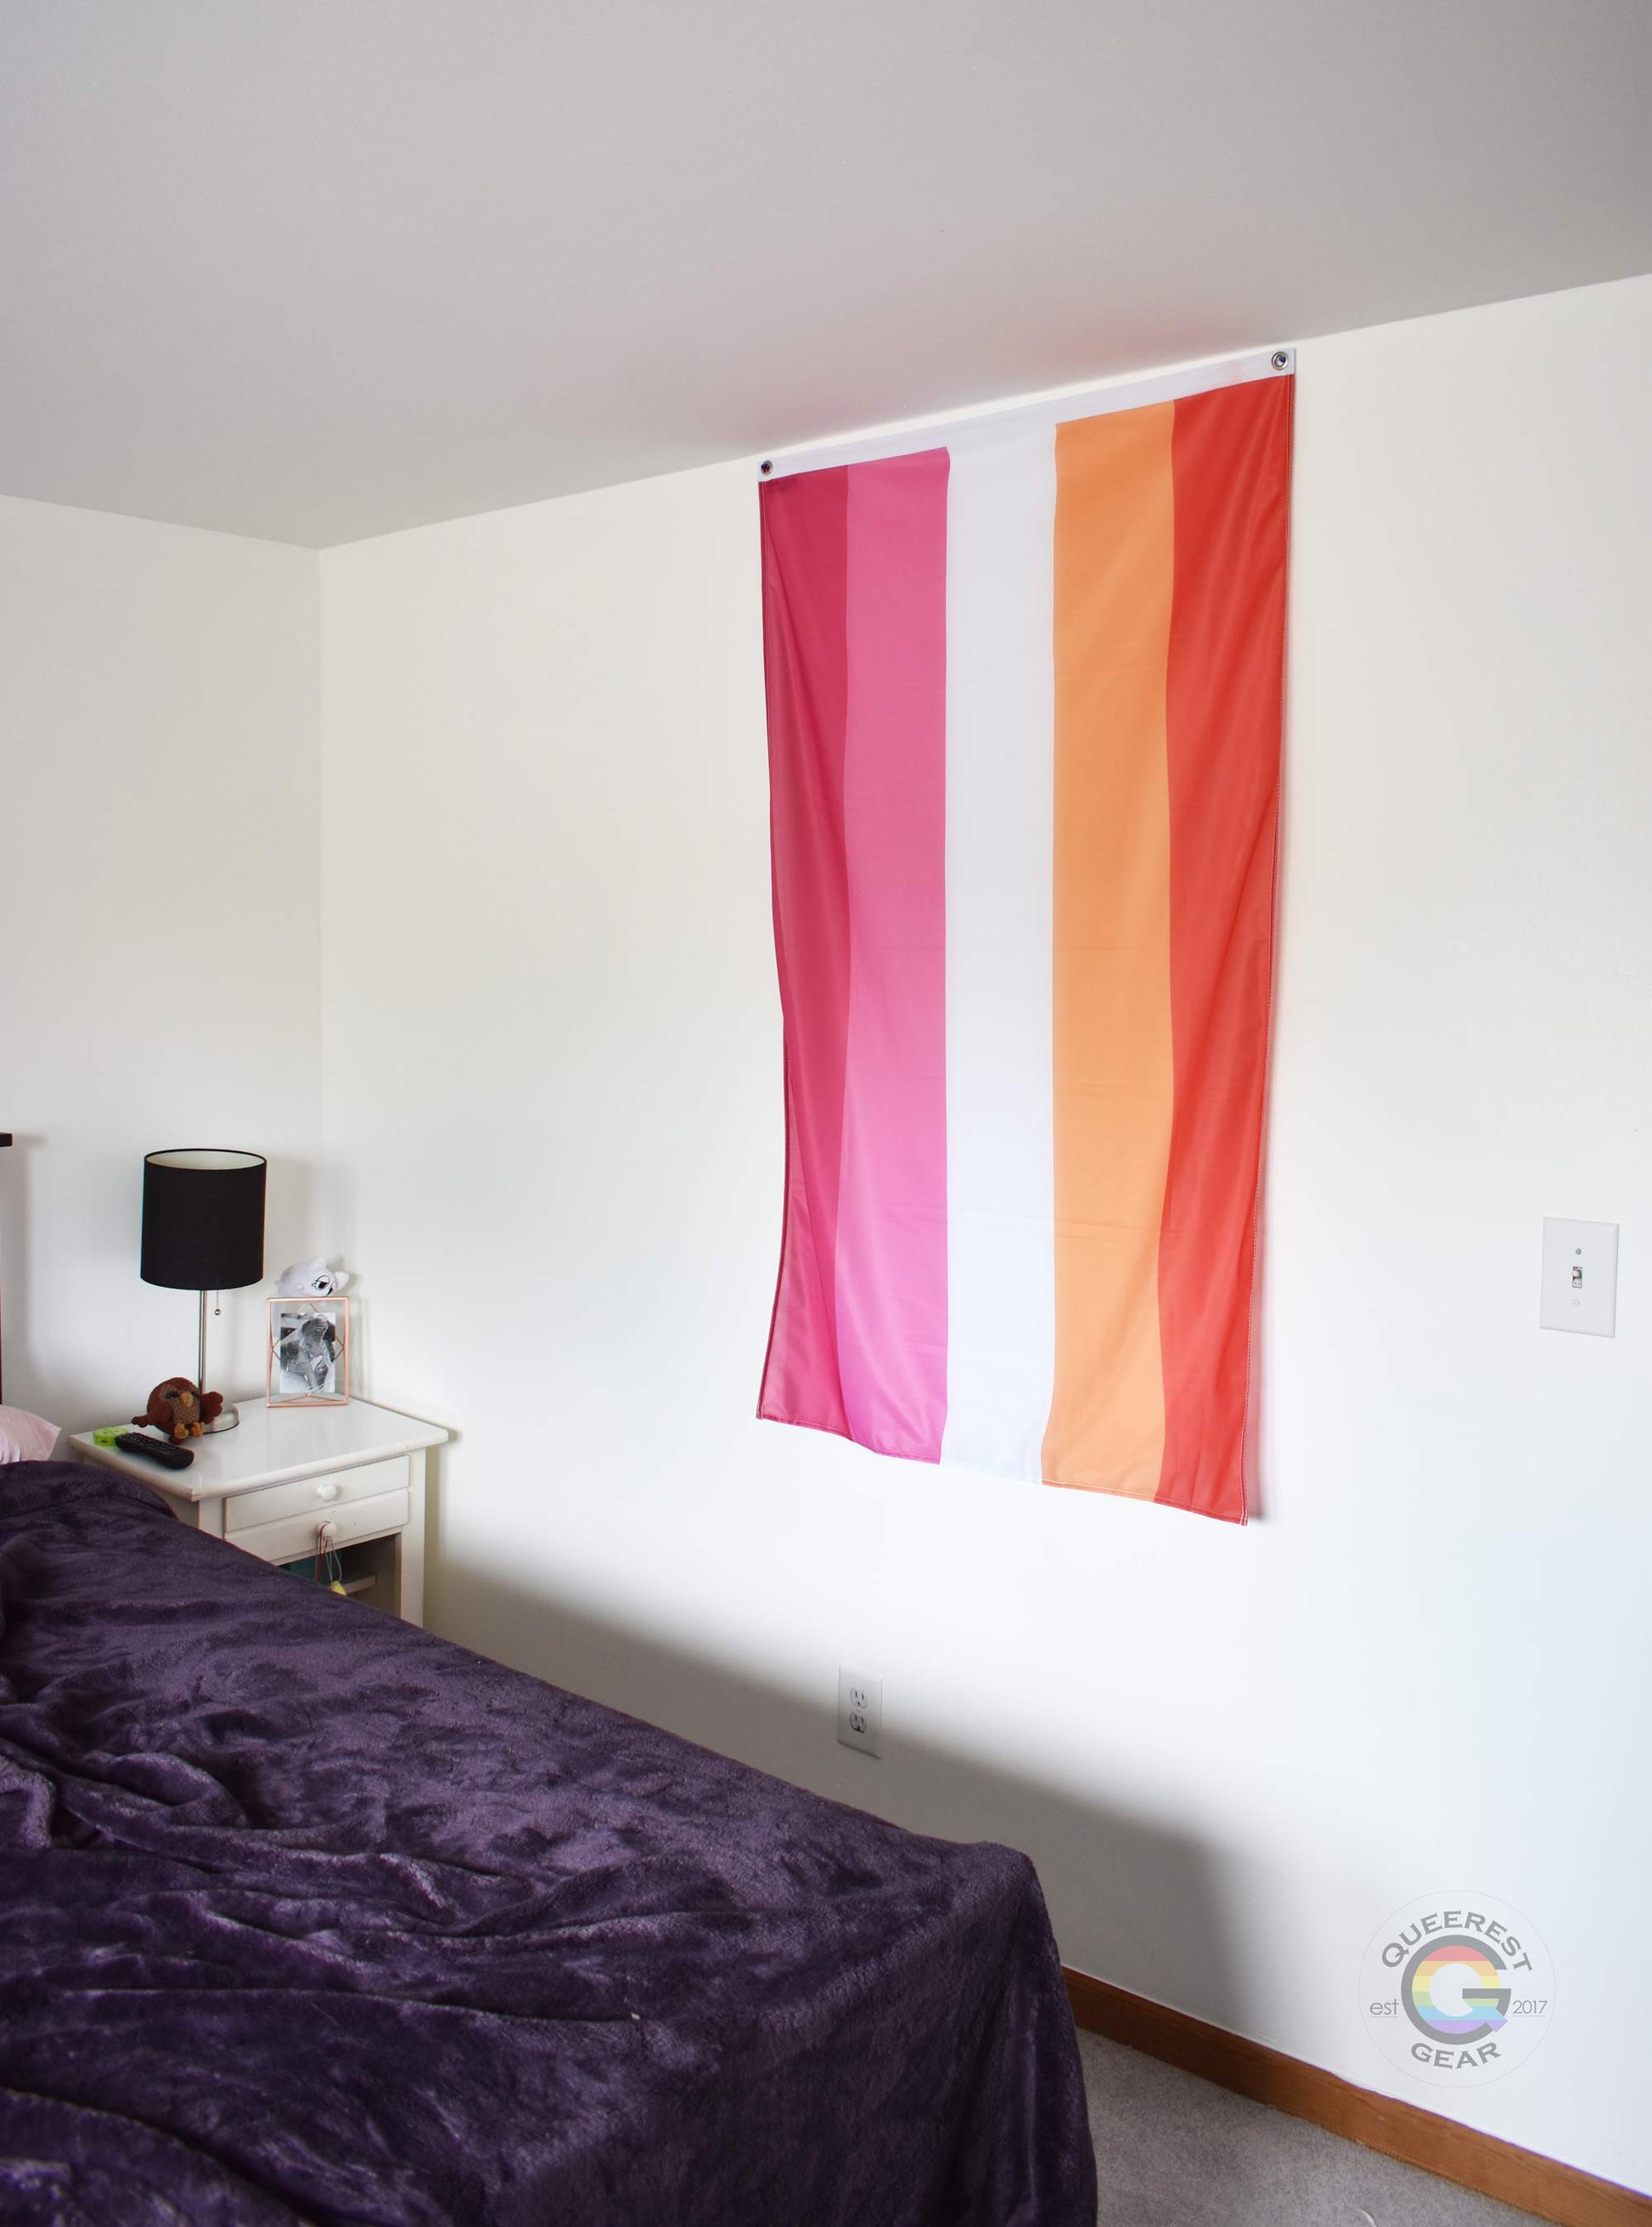  3’x5’ lesbian flag hanging vertically on the wall of a bedroom with a nightstand and a bed